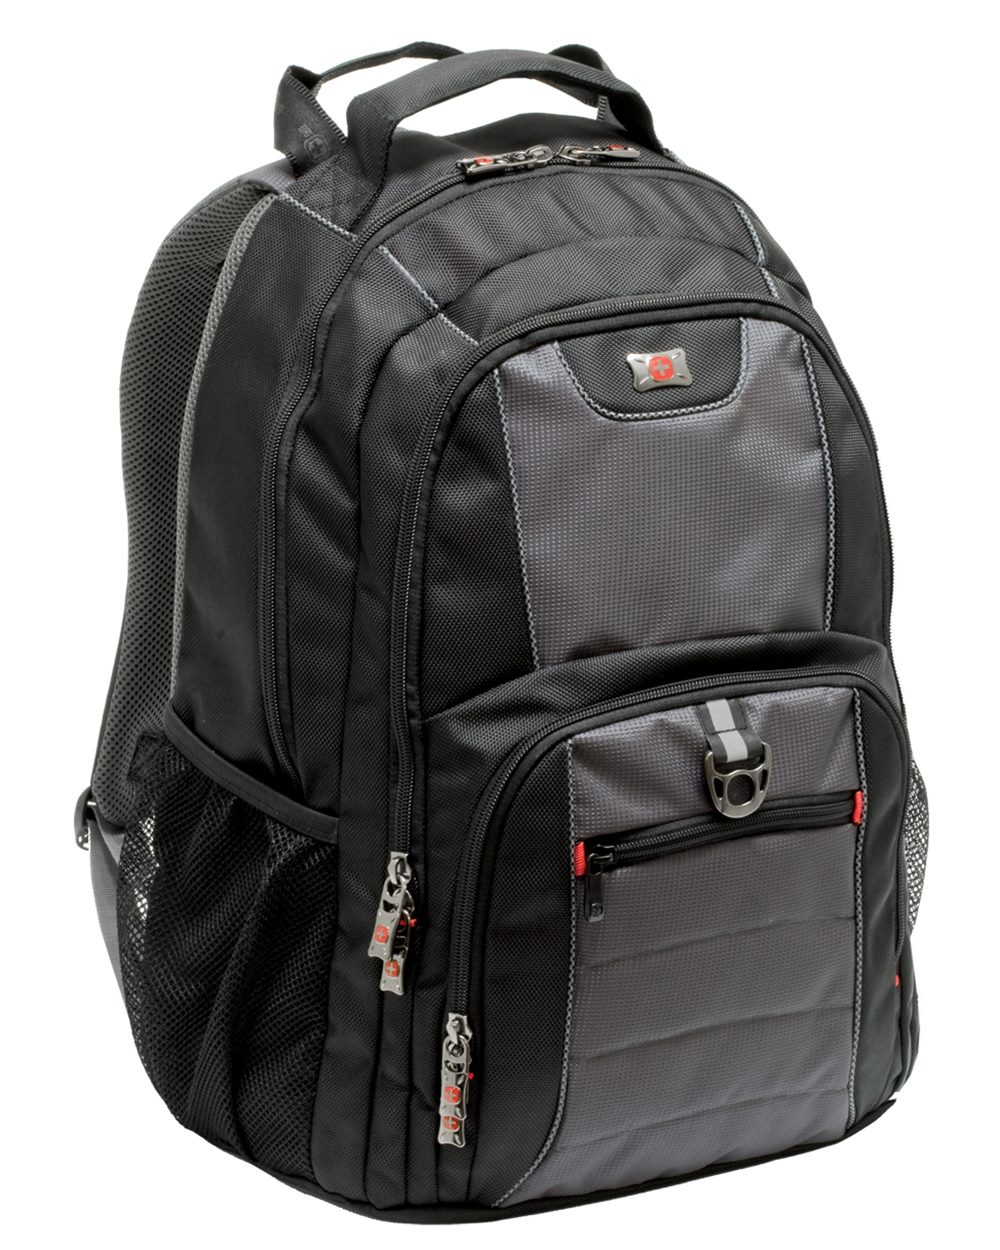 Wenger 25L Pillar Backpack - 67382140 - Wescan Embroidery & Printing